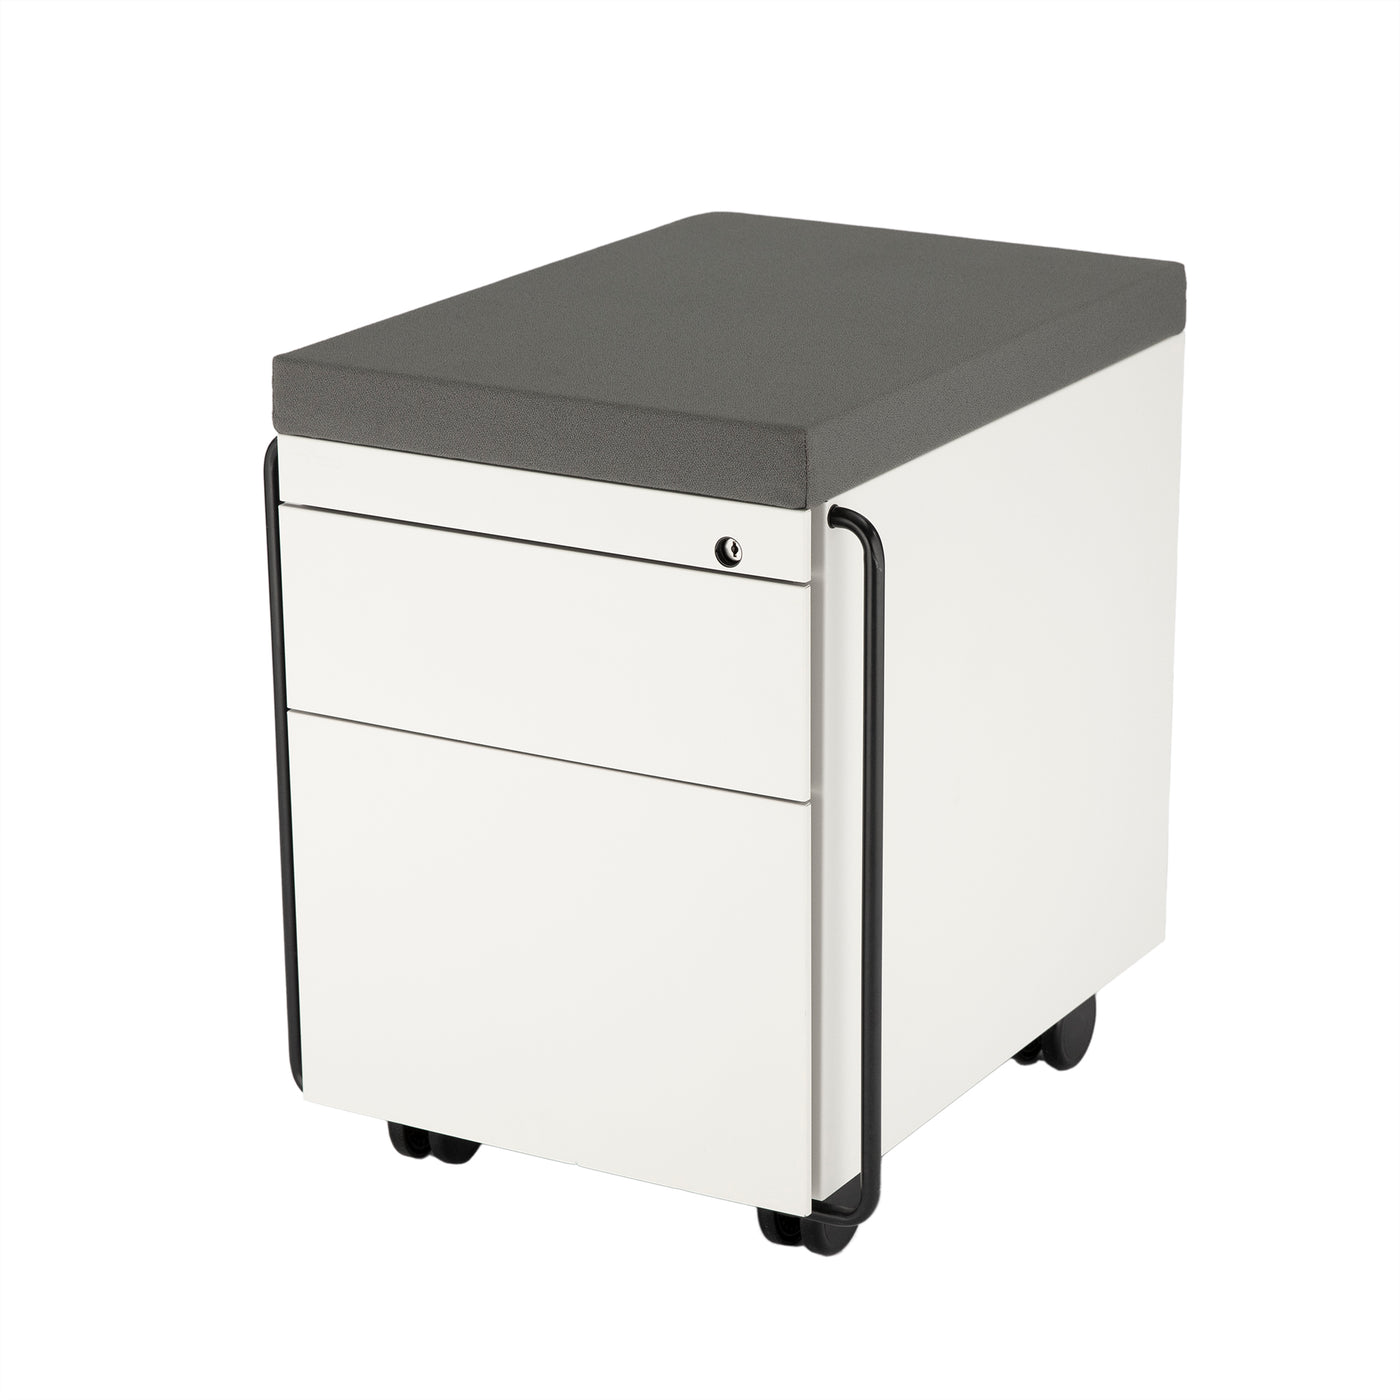 Ahrend mobile filing cabinet - Second-hand